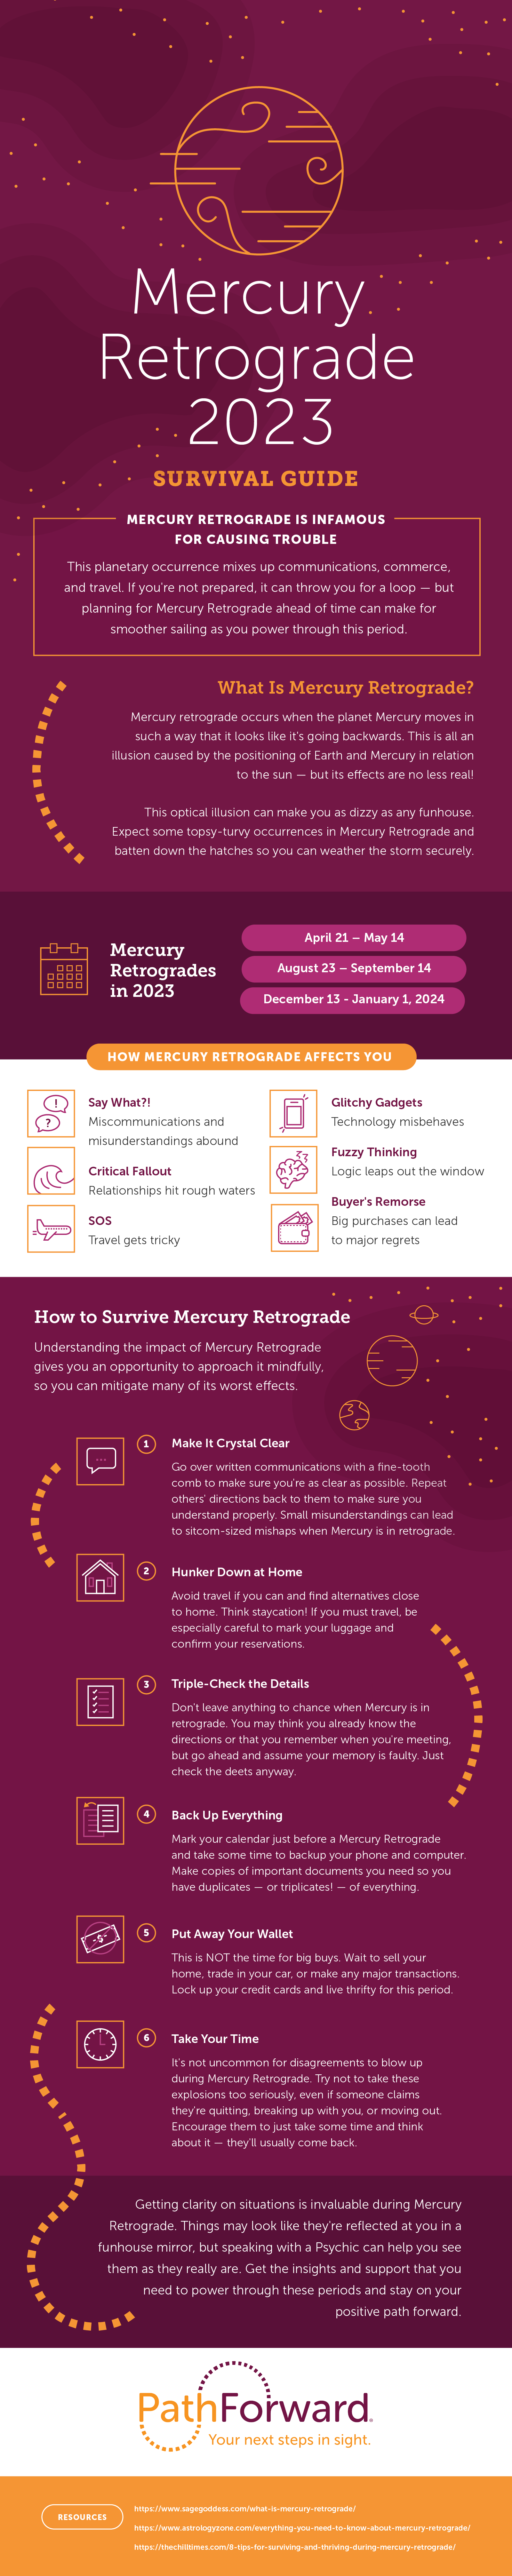 Mercury retrograde is on its way on January 13, May 10, September 9 and December 28, 2022. Learn about its meaning, how it affects you, and how to cope.